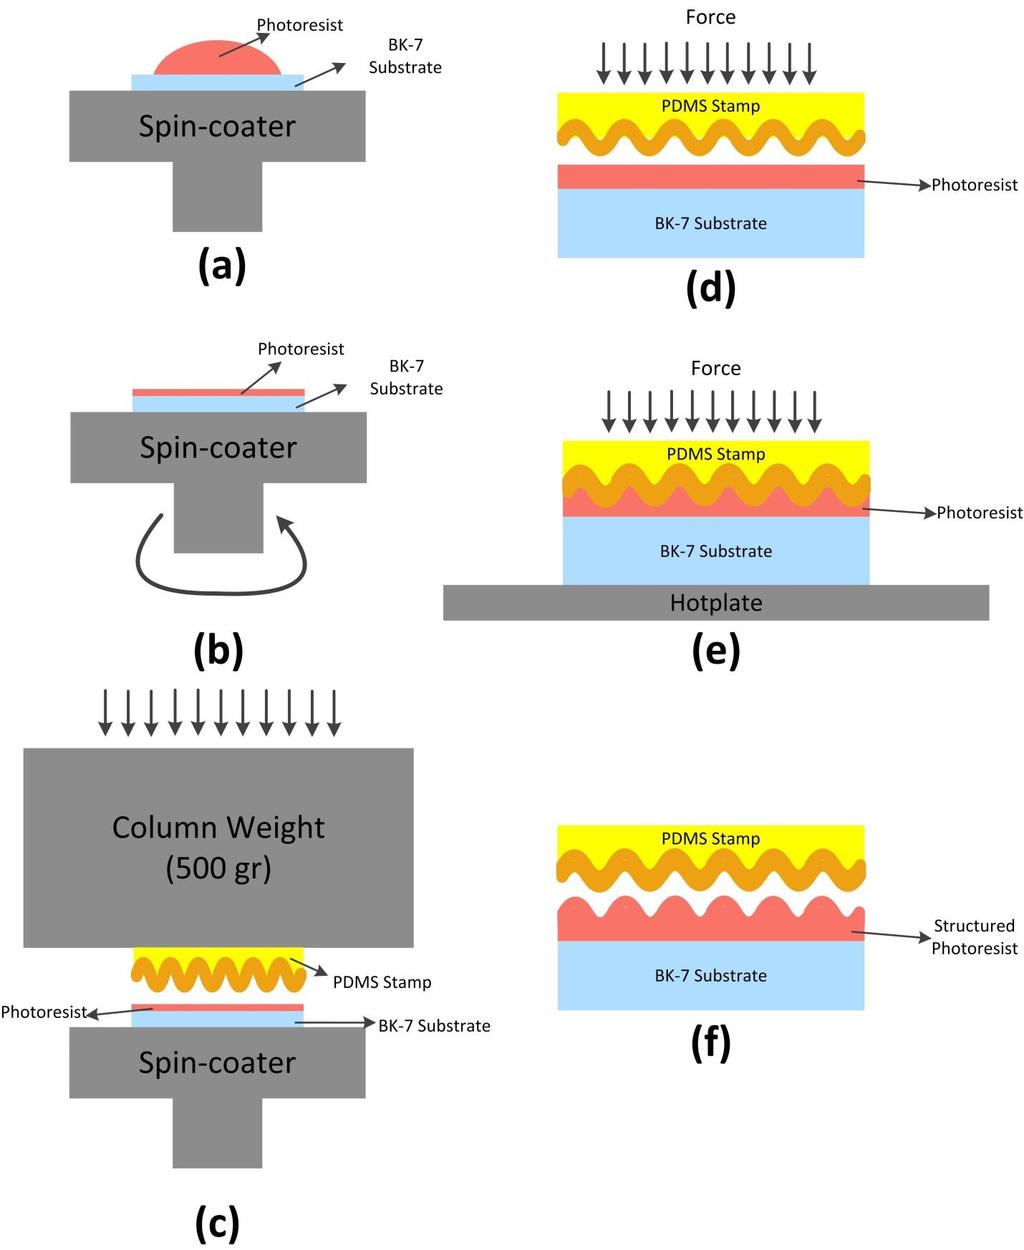 Figure 24: Illustration of imprinting process: (a) droplets of photoresist is applied on the glass substrate; (b) spinning process leaves a determined thickness of photoresist film; (c) PDMS stamp